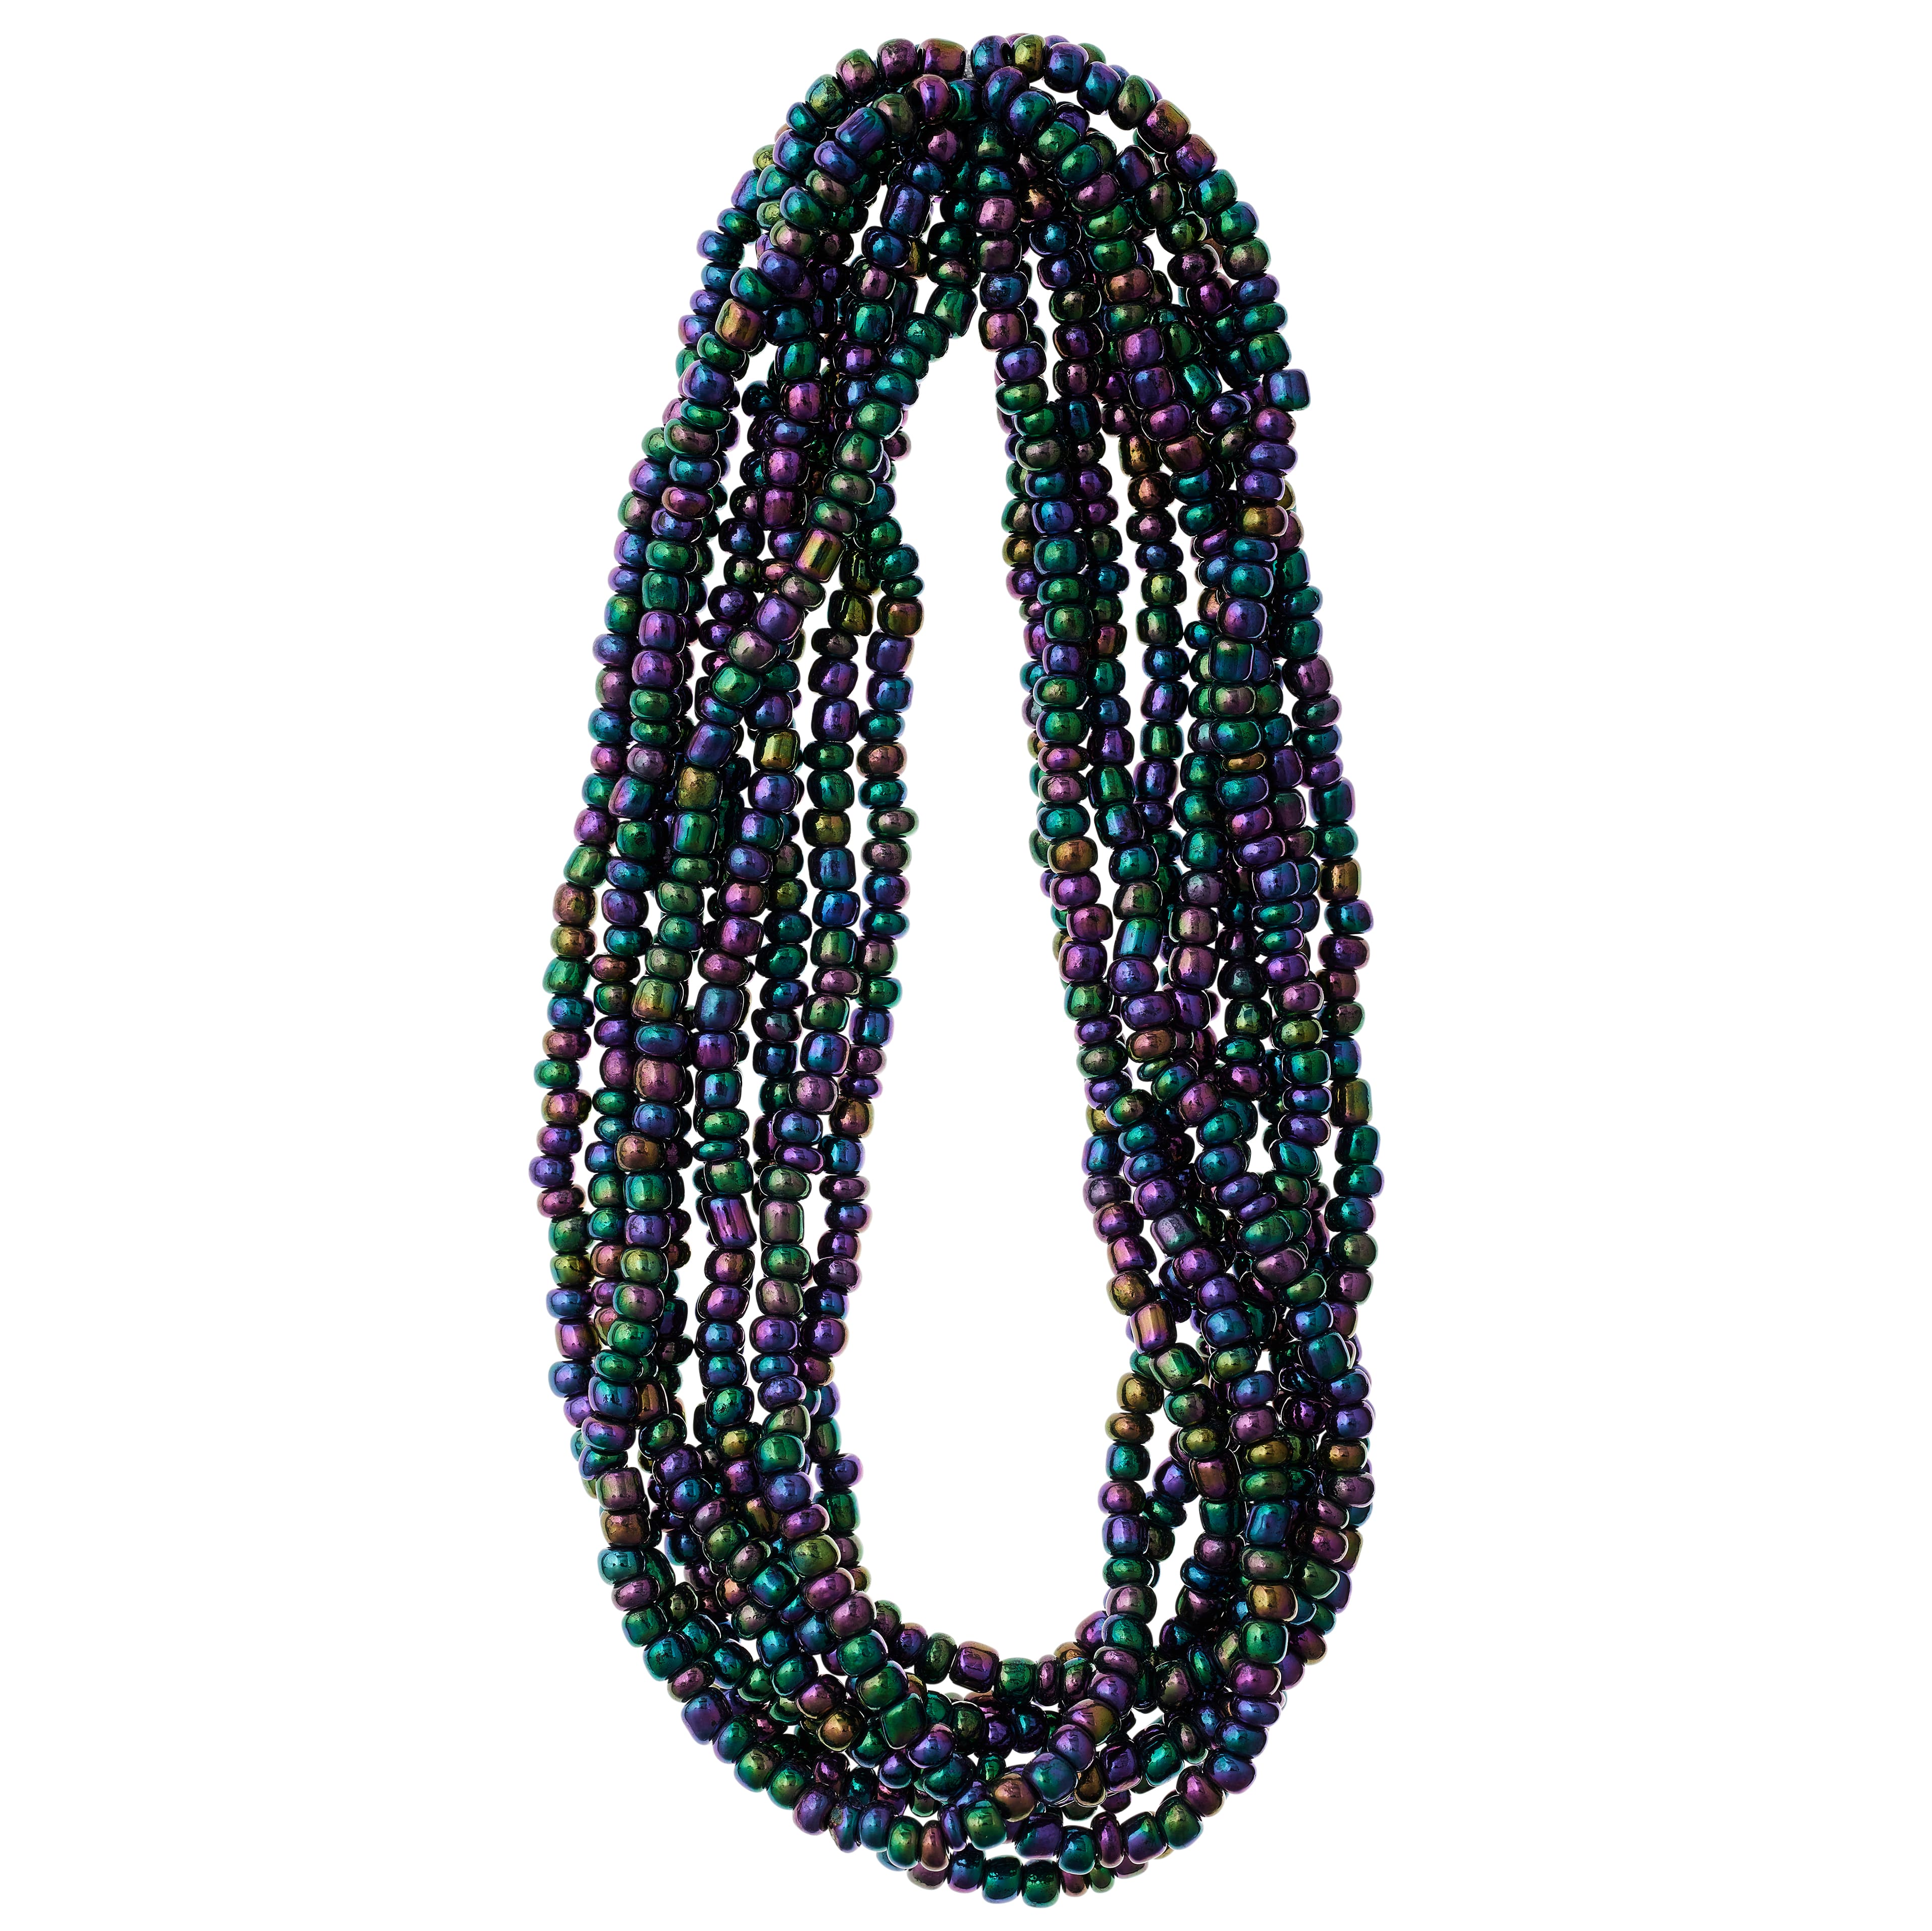 Black Iridescent Glass Seed Beads, 6/0 by Bead Landing™